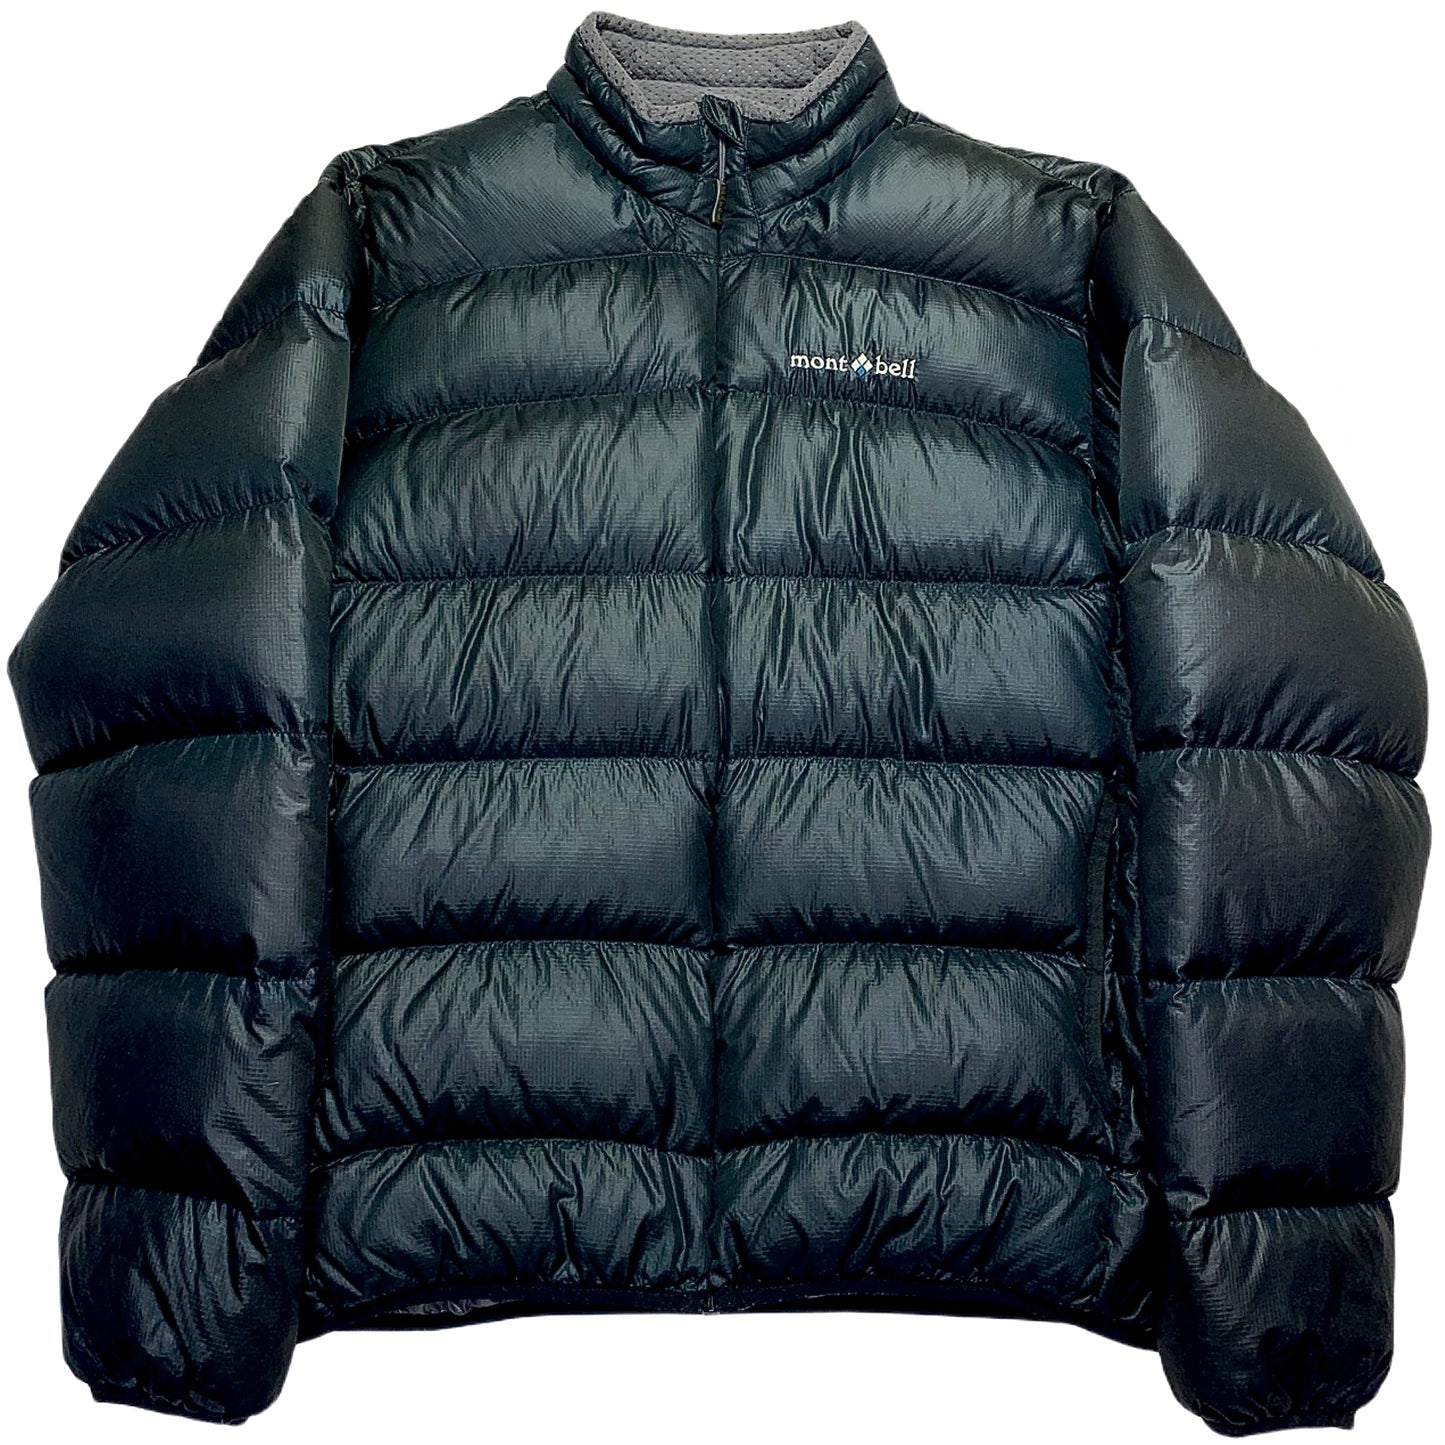 Montbell Puffer Jacket in Black